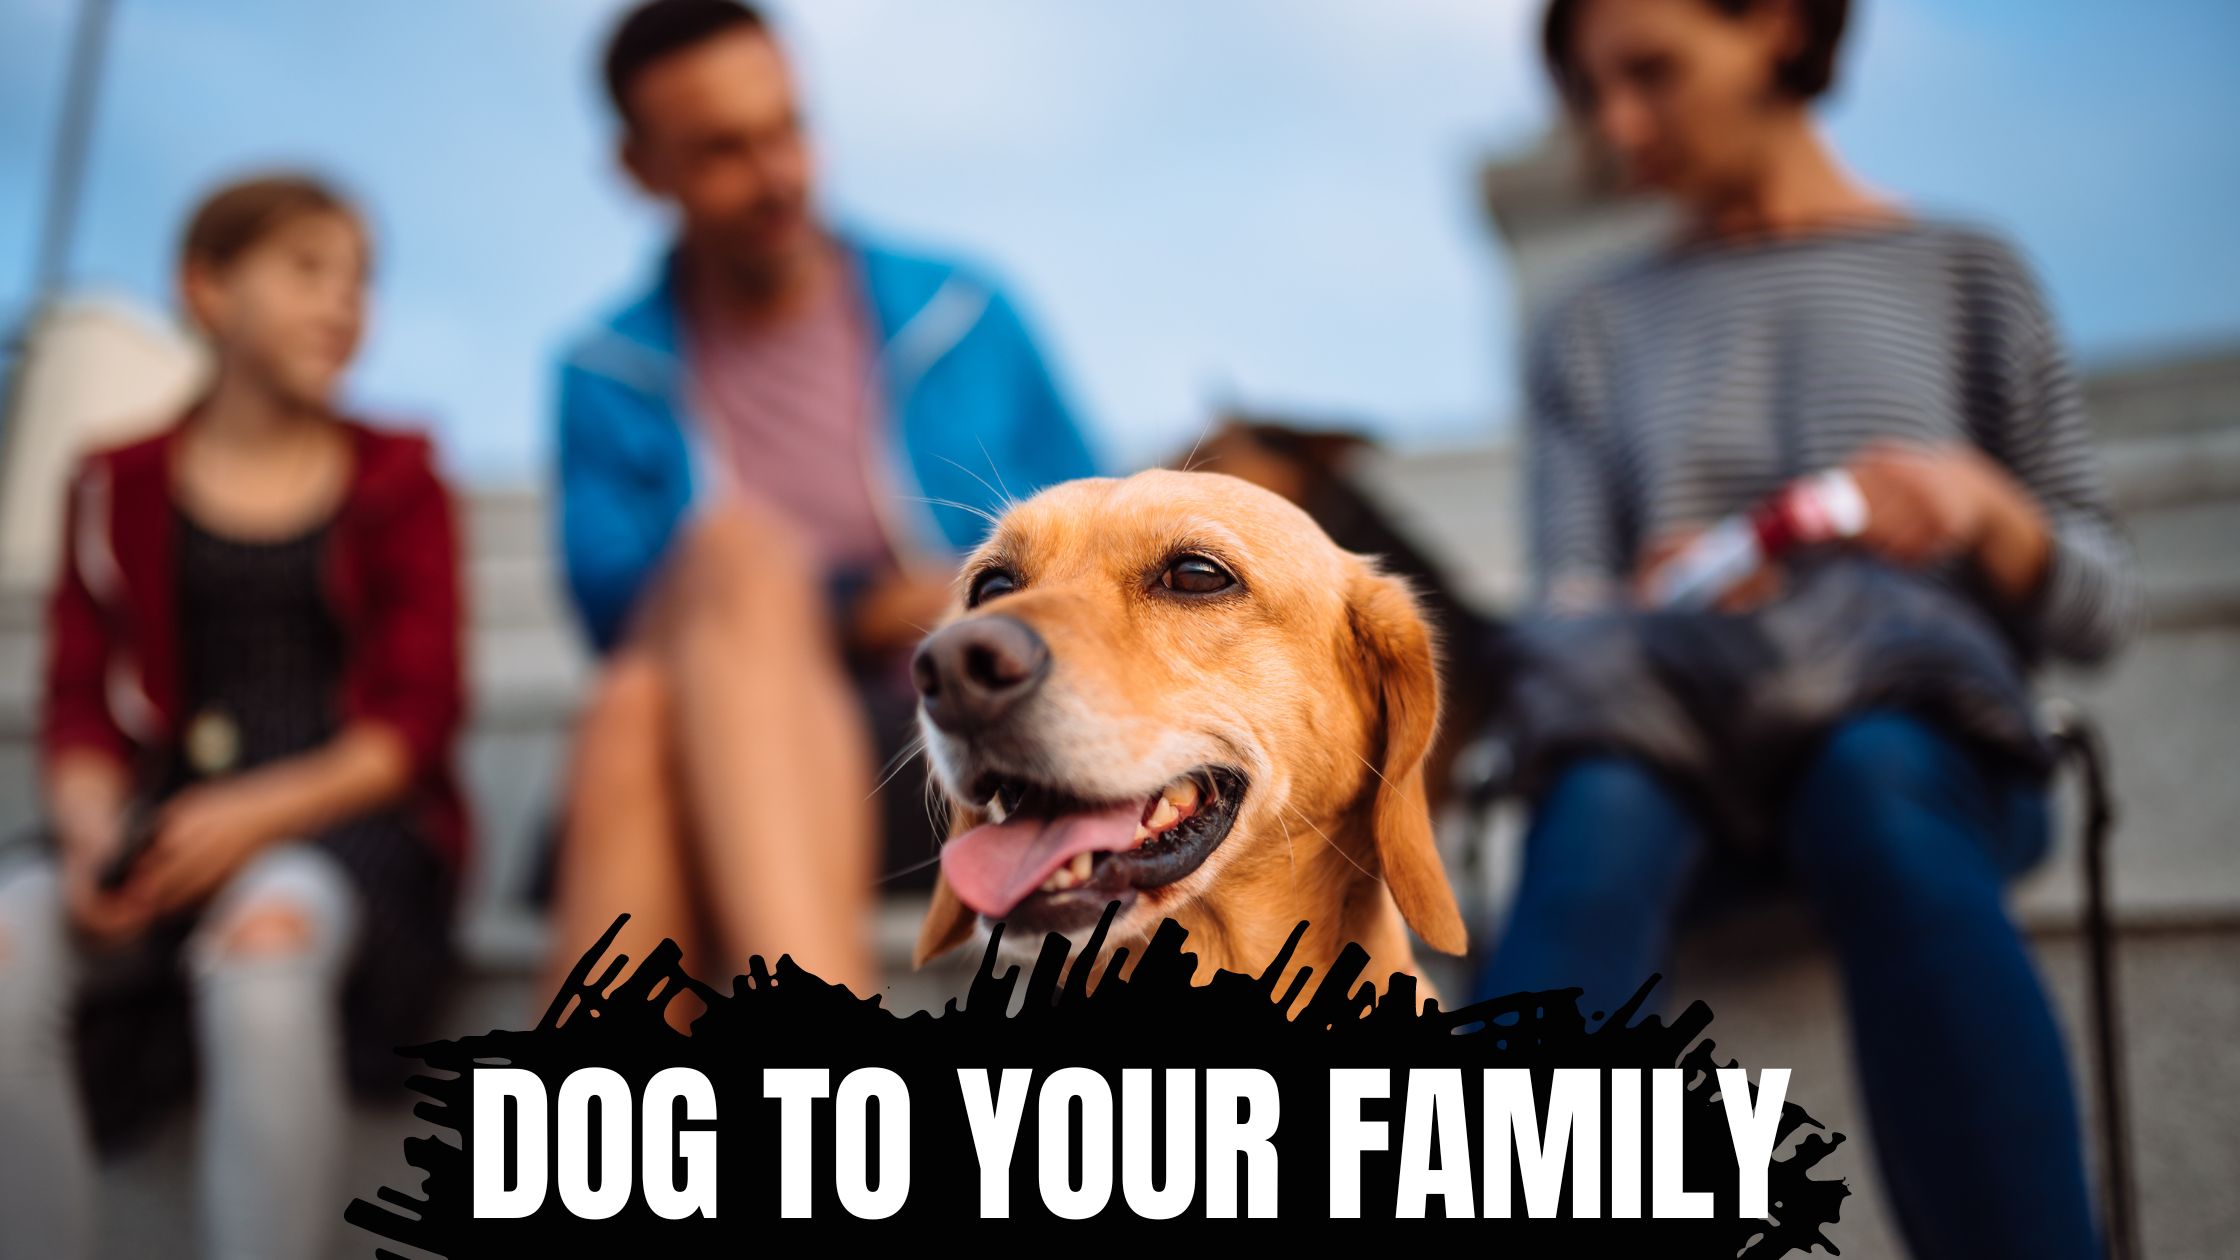 How Do You Introduce A Dog To Your Family?